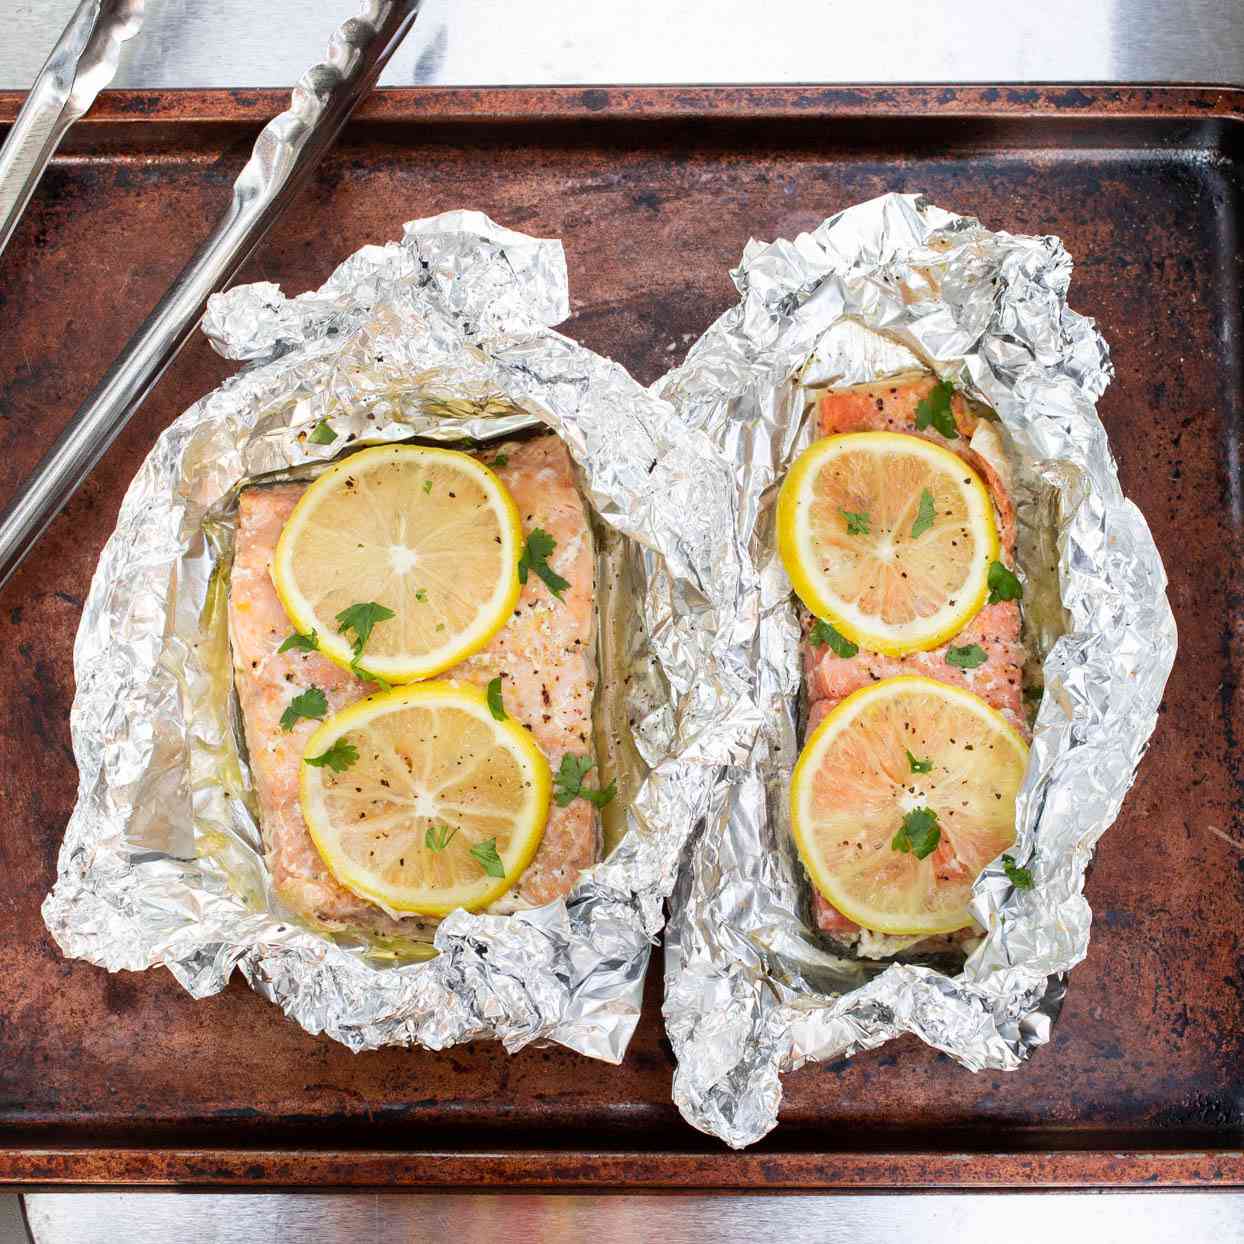 grilled salmon in foil